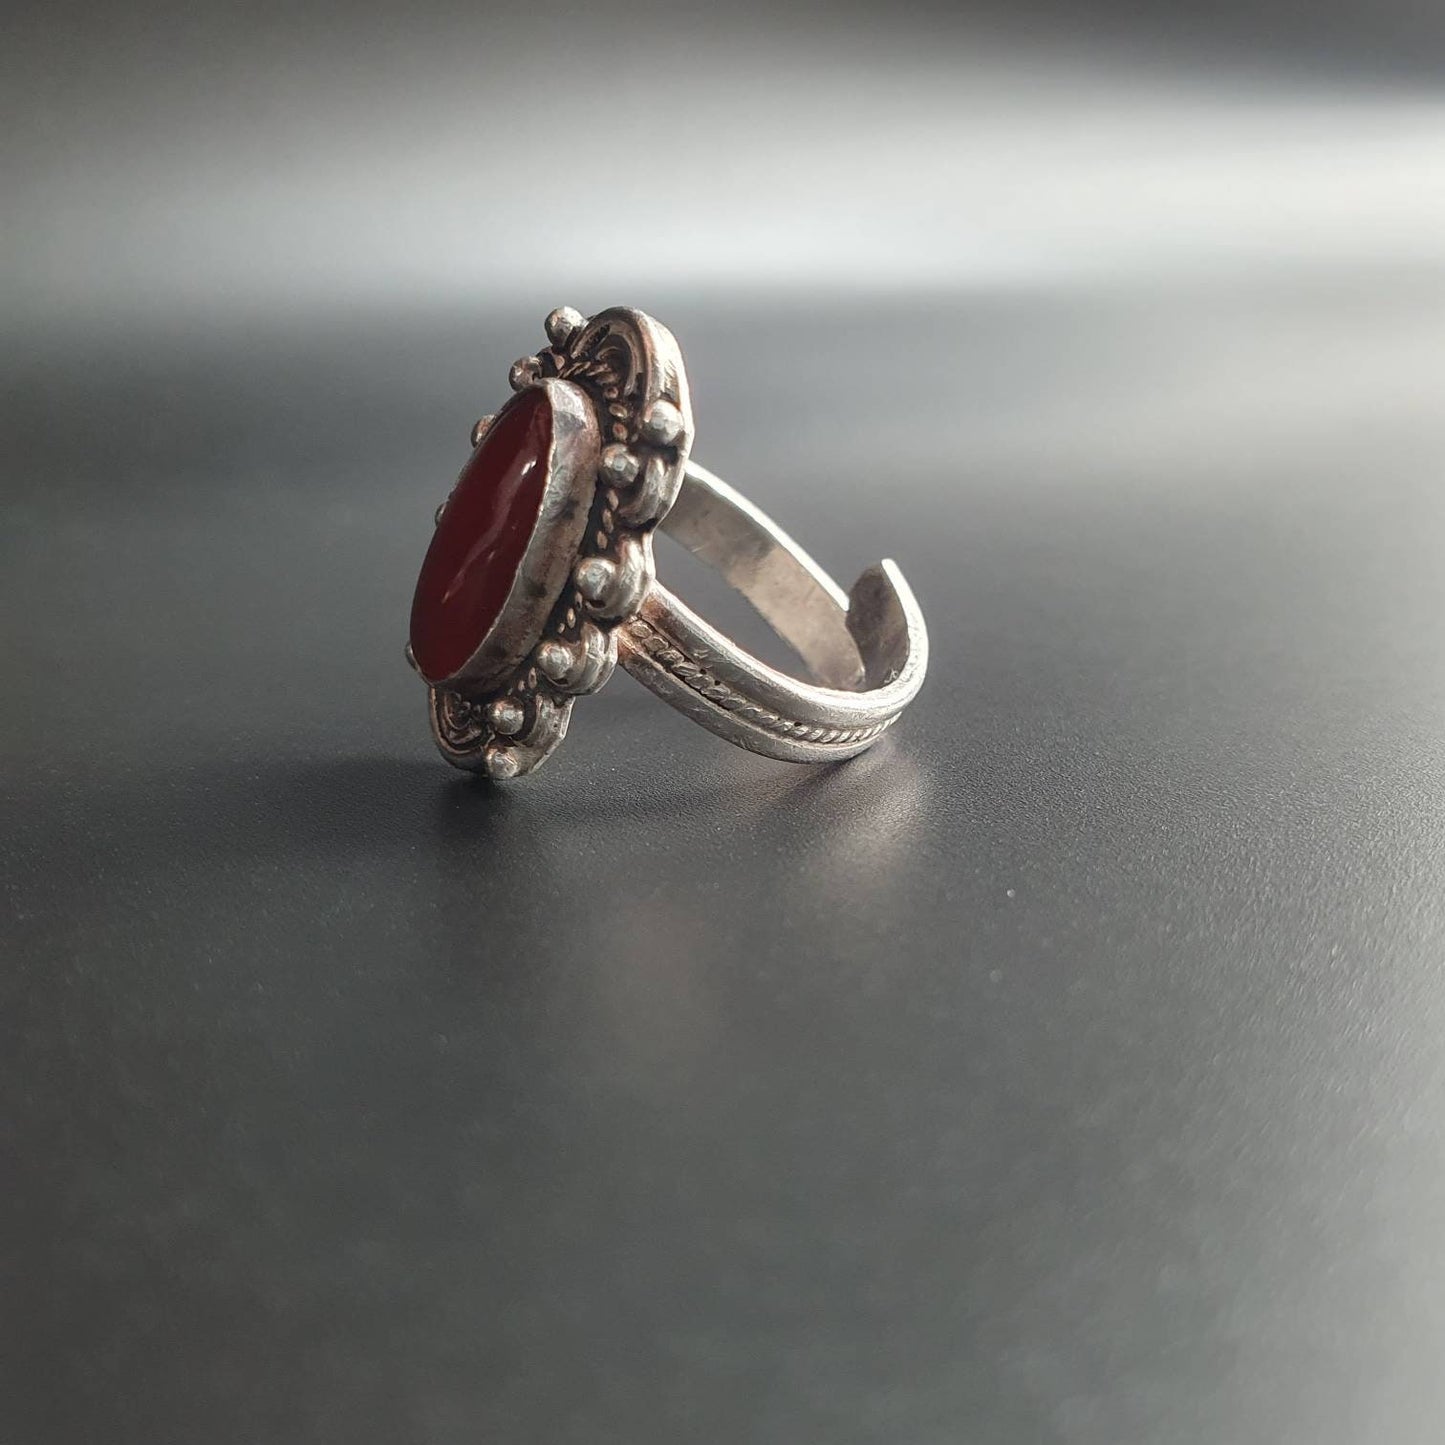 Vintage ring, statement ring, sterling silver ring, carnelian ring, adjustable ring, silver jewellery, gift's, occasions, gothic ring